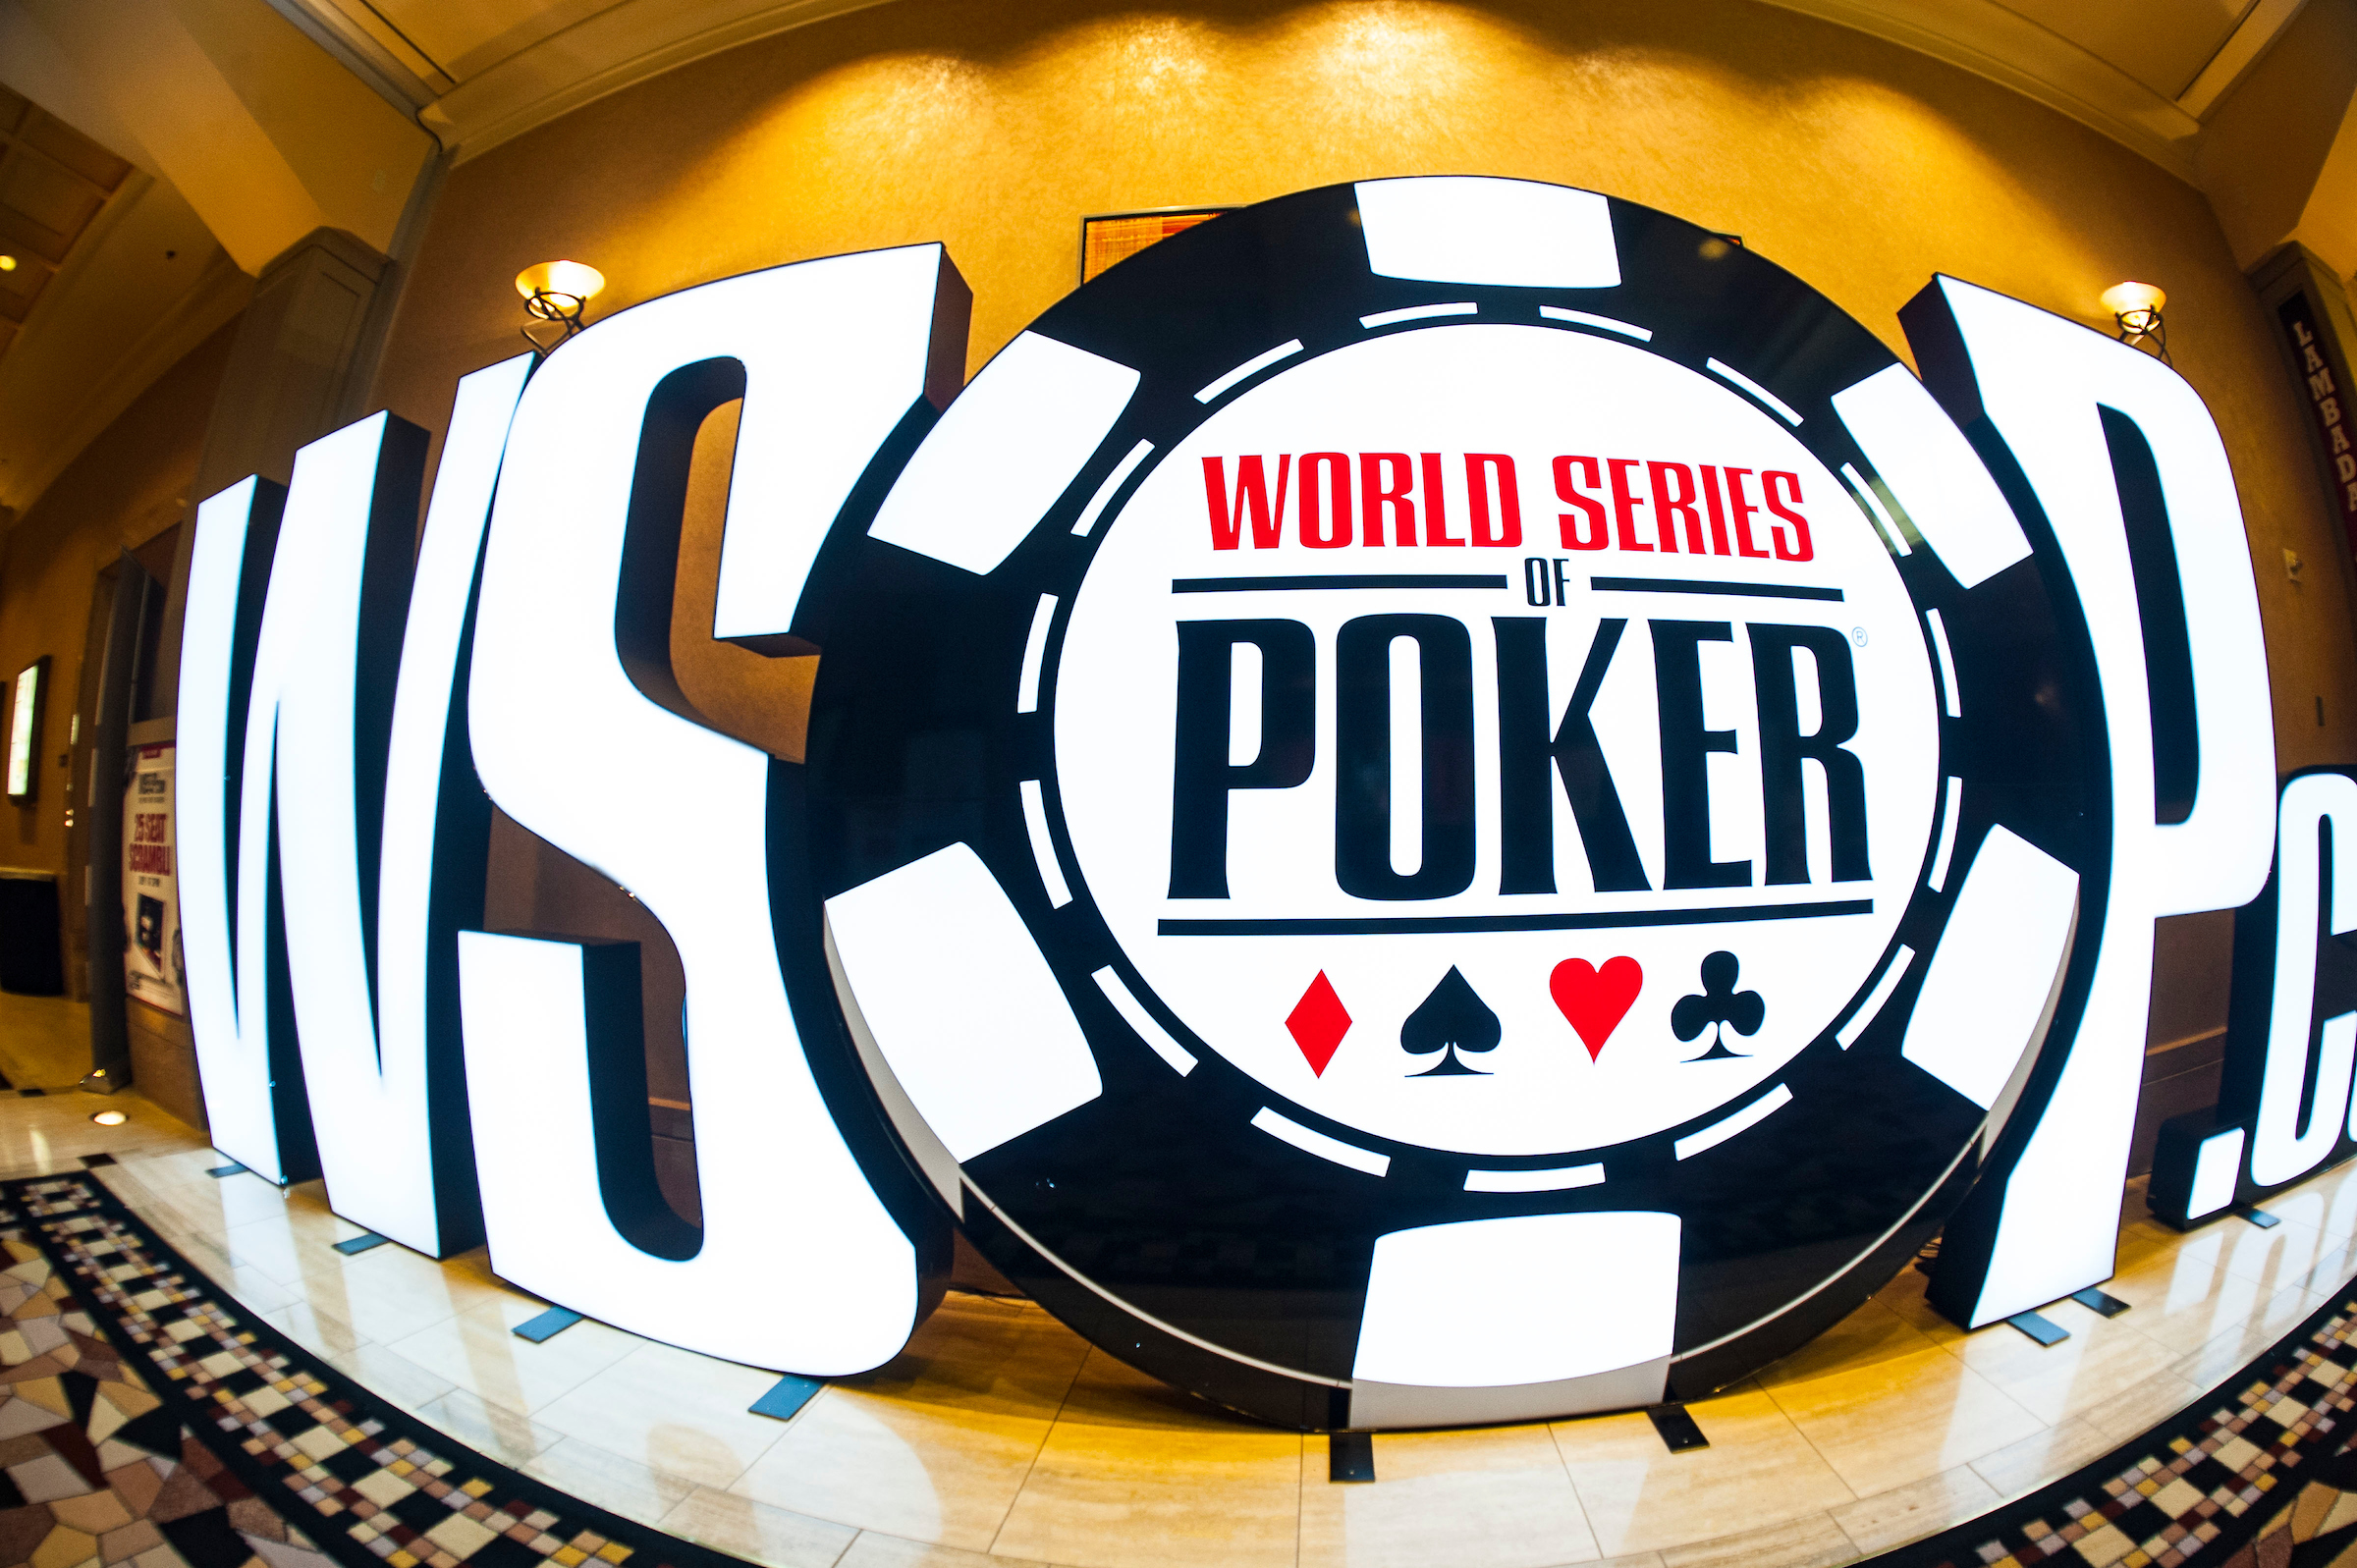 is world series of poker rigged